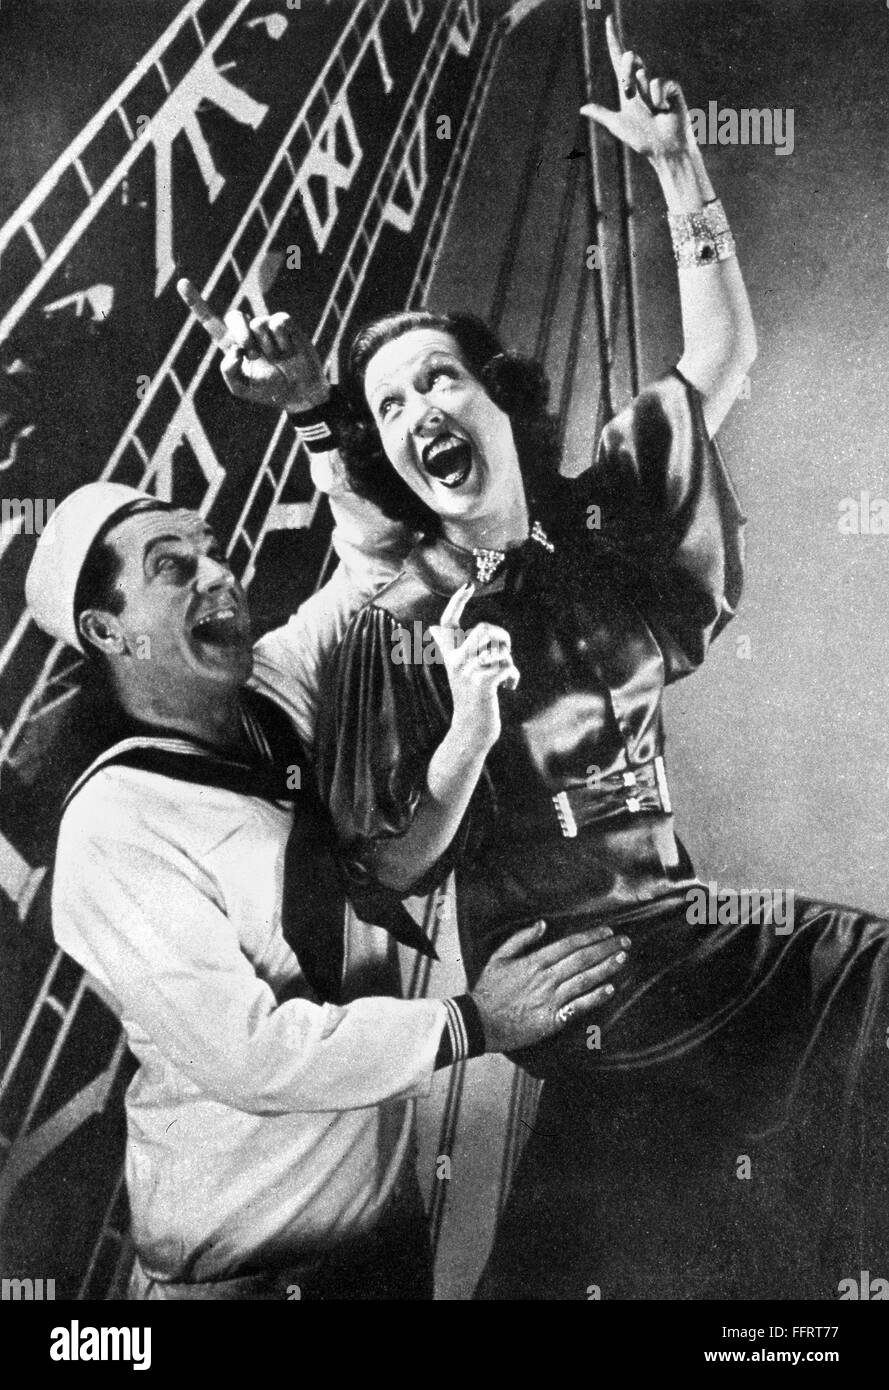 ETHEL MERMAN (1908-1984). /nAmerican actress and singer. Photographed by Edward Steichen during a Broadway performance of Cole Porter's musical 'Anything Goes,' with co-star William Gaxton, c1935. Stock Photo